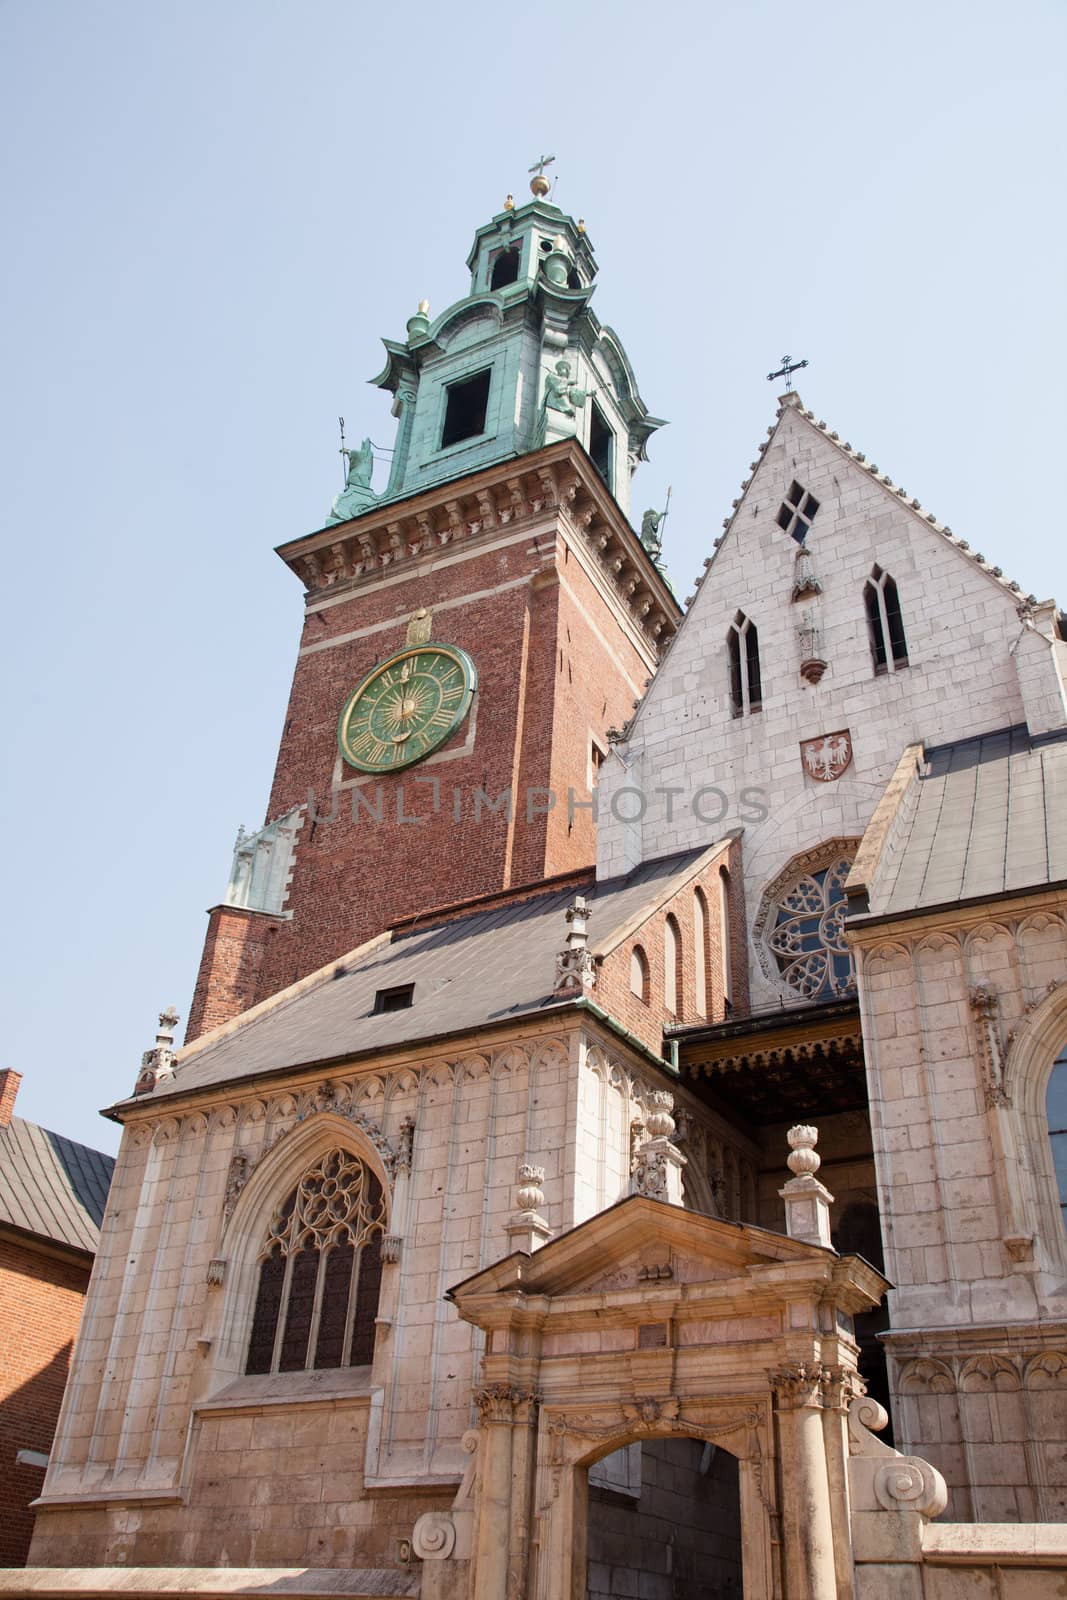 Wawel Cathedral, also known as the Cathedral Basilica of Sts. Stanisław and Vaclav, is a church located on Wawel Hill in Kraków